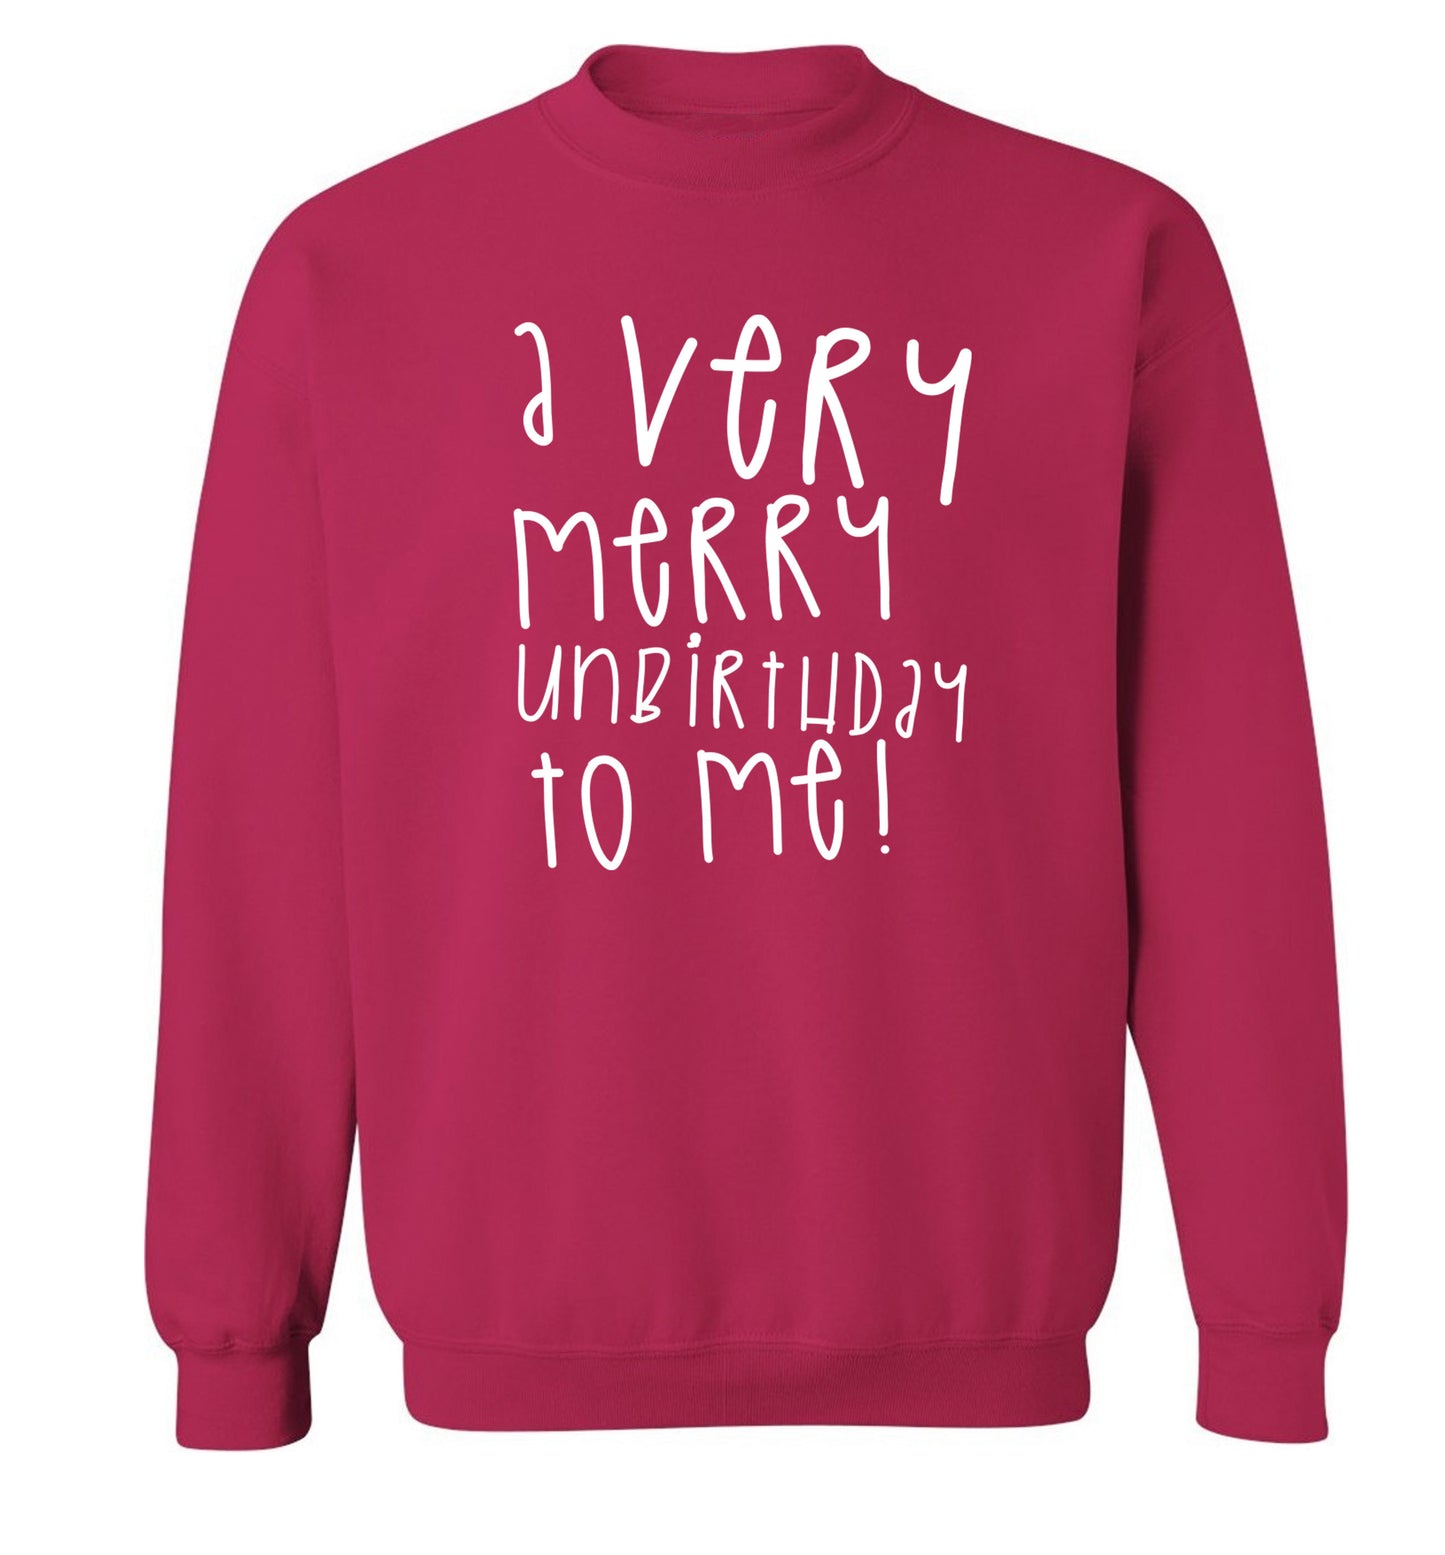 A very merry unbirthday to me! Adult's unisex pink Sweater 2XL